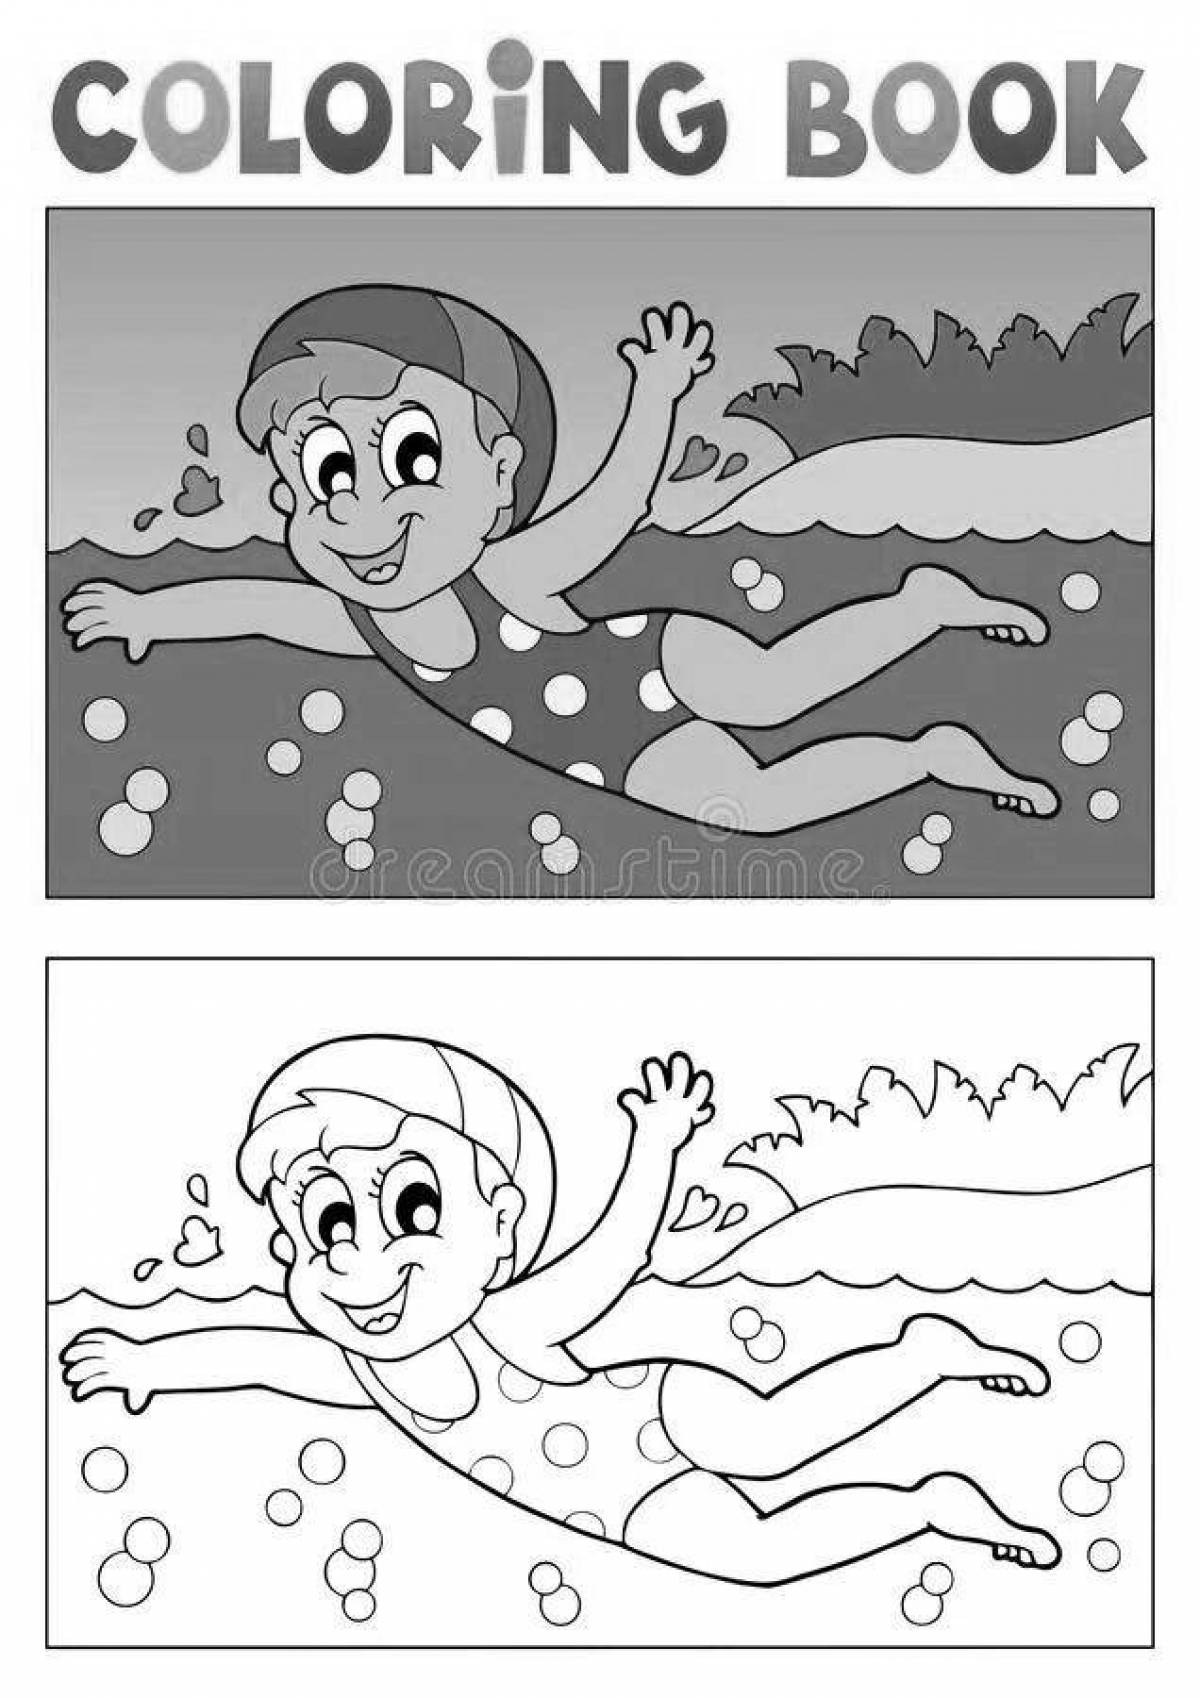 Live swimming coloring page